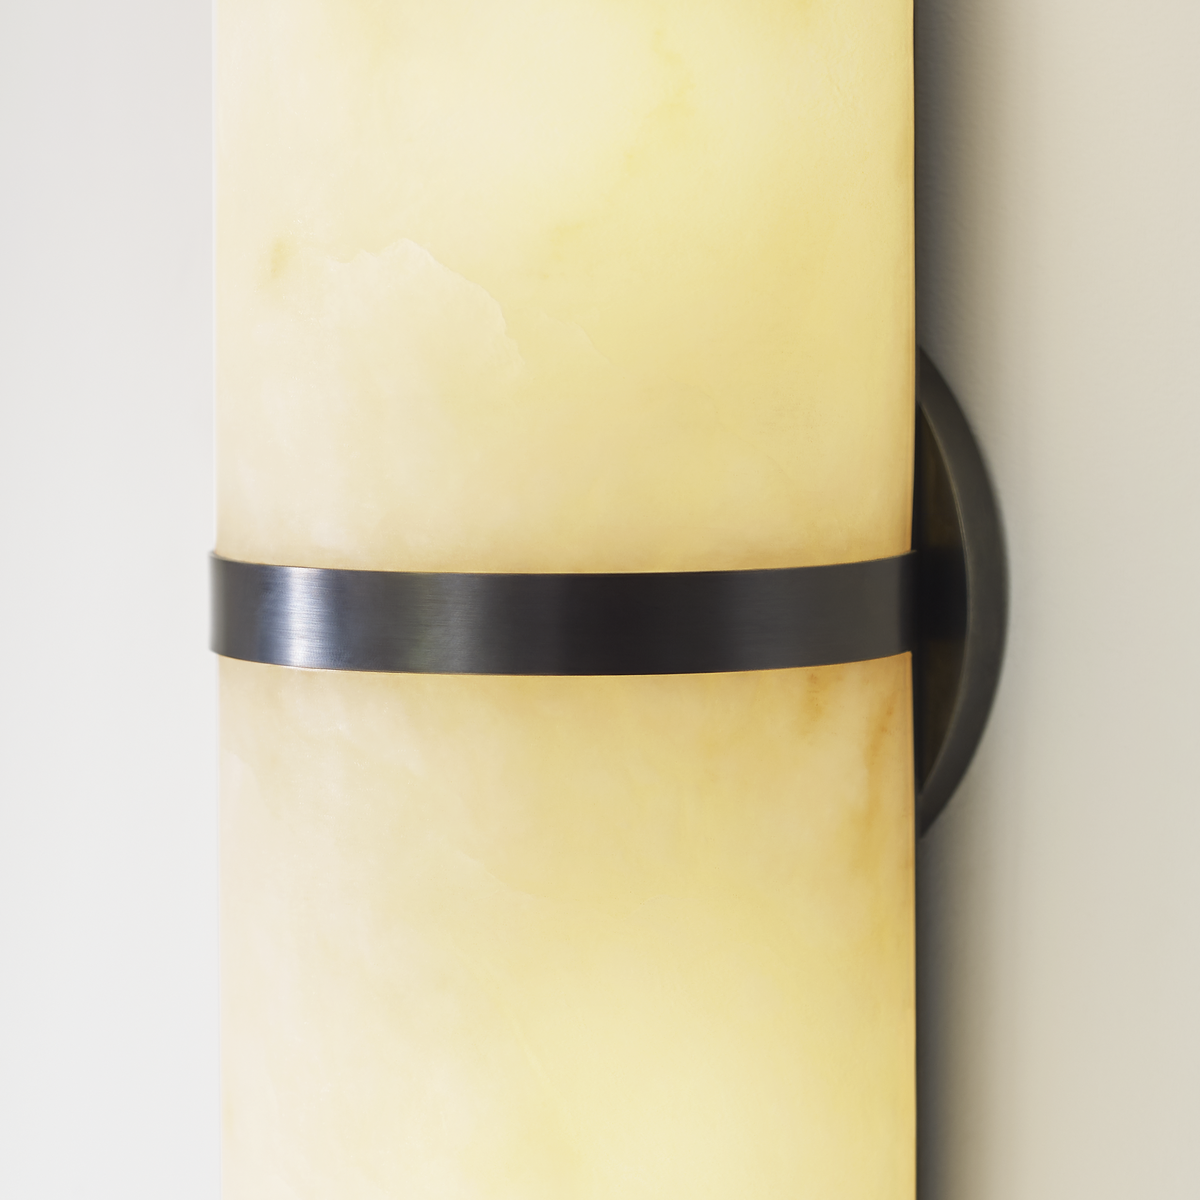 Alabaster Pill-shaped Wall Sconce 12.5"H x 4.25" W